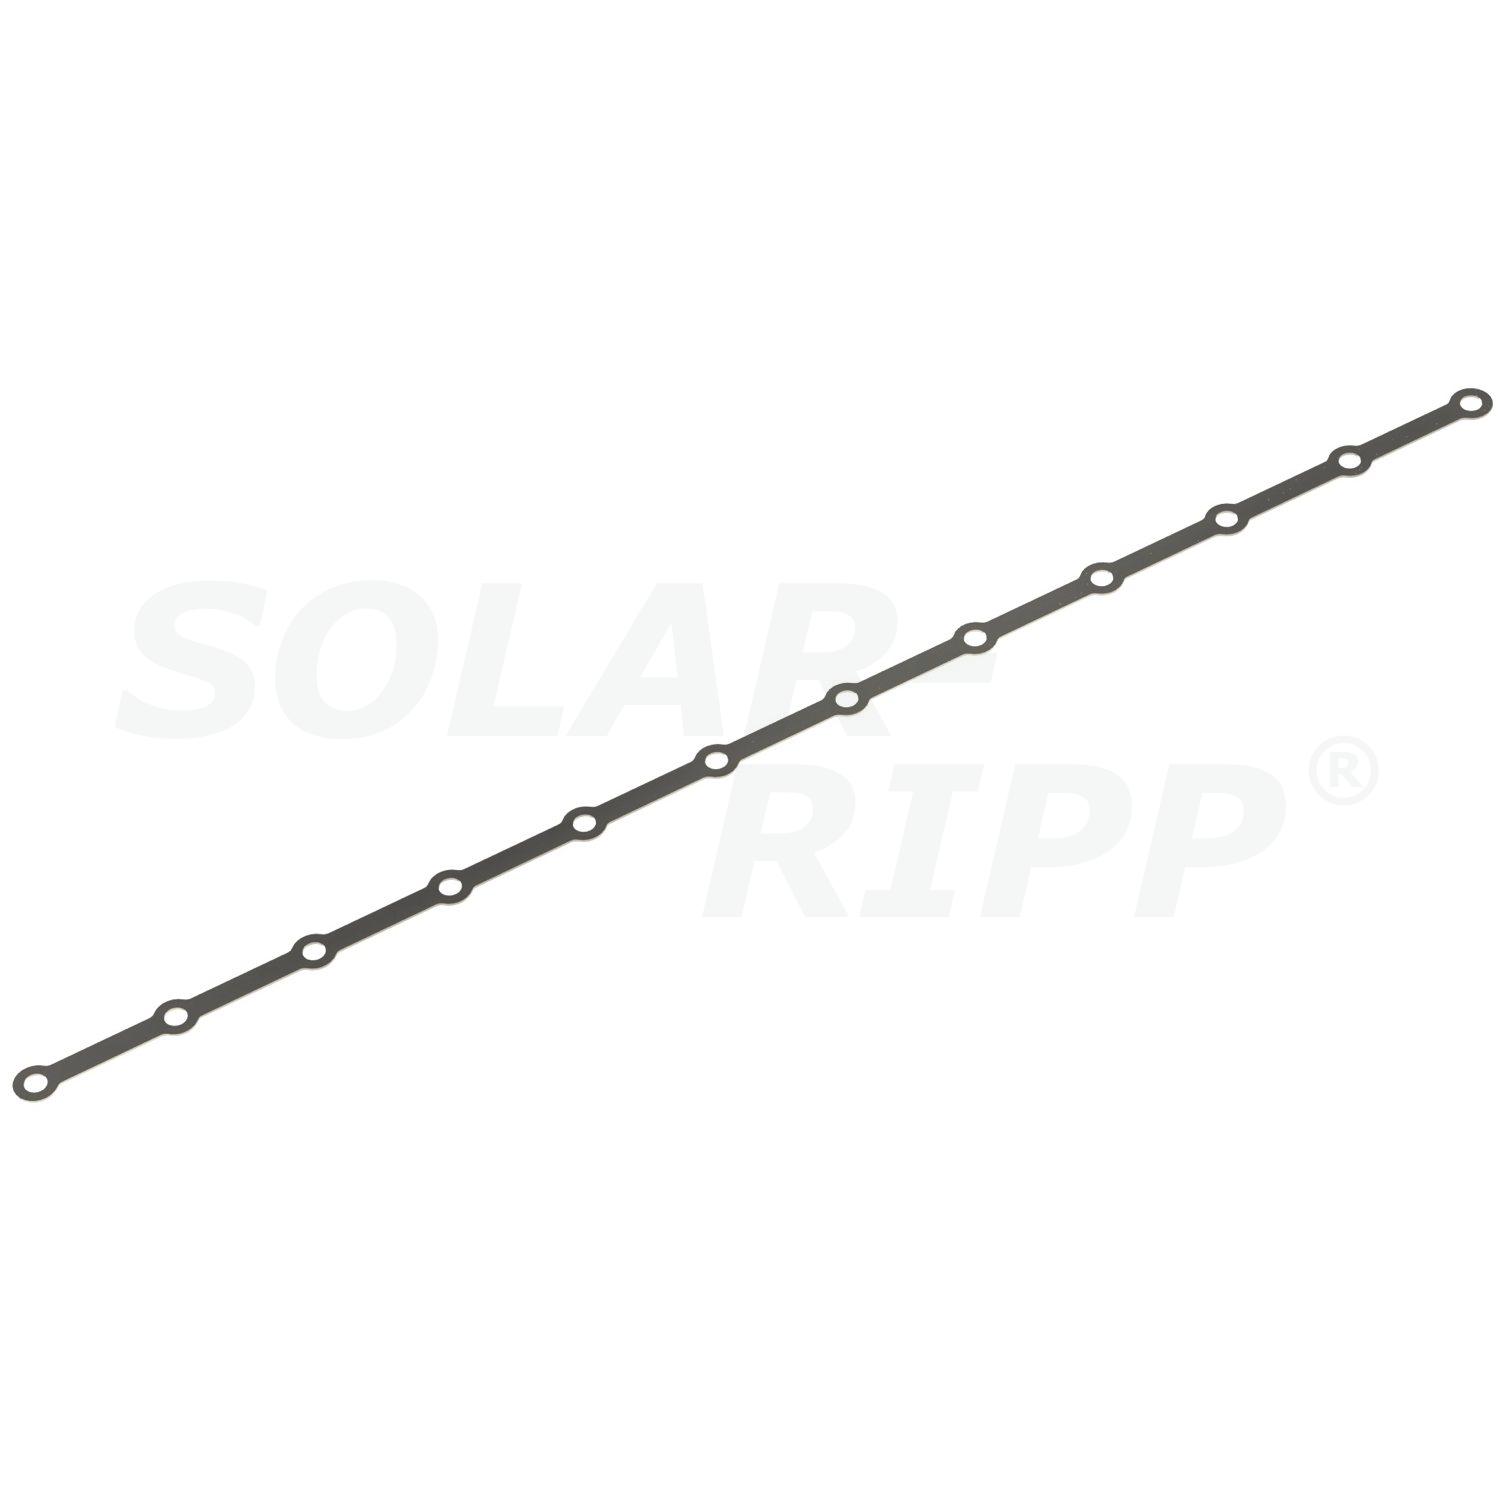 Perforated strips for fastening the SOLAR-RIPP ® distributor/collector